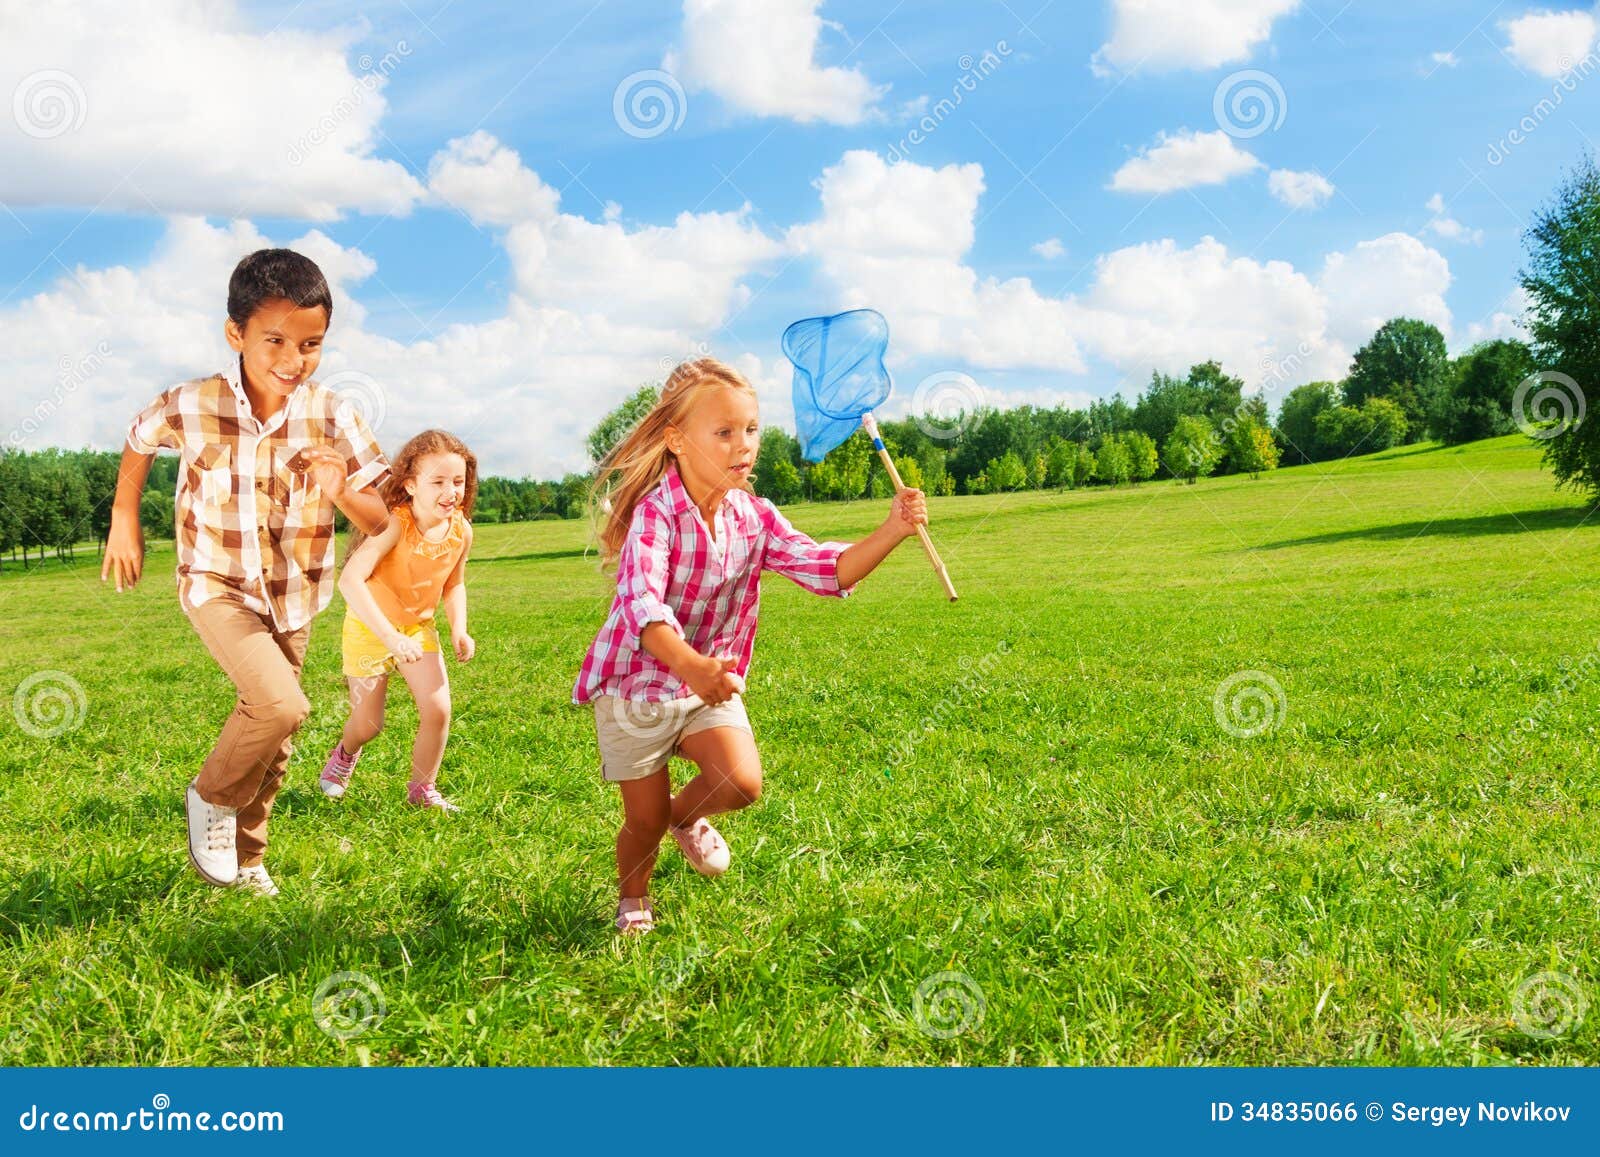 6 ,7 Kids Running with Butterfly Net Stock Photo - Image of